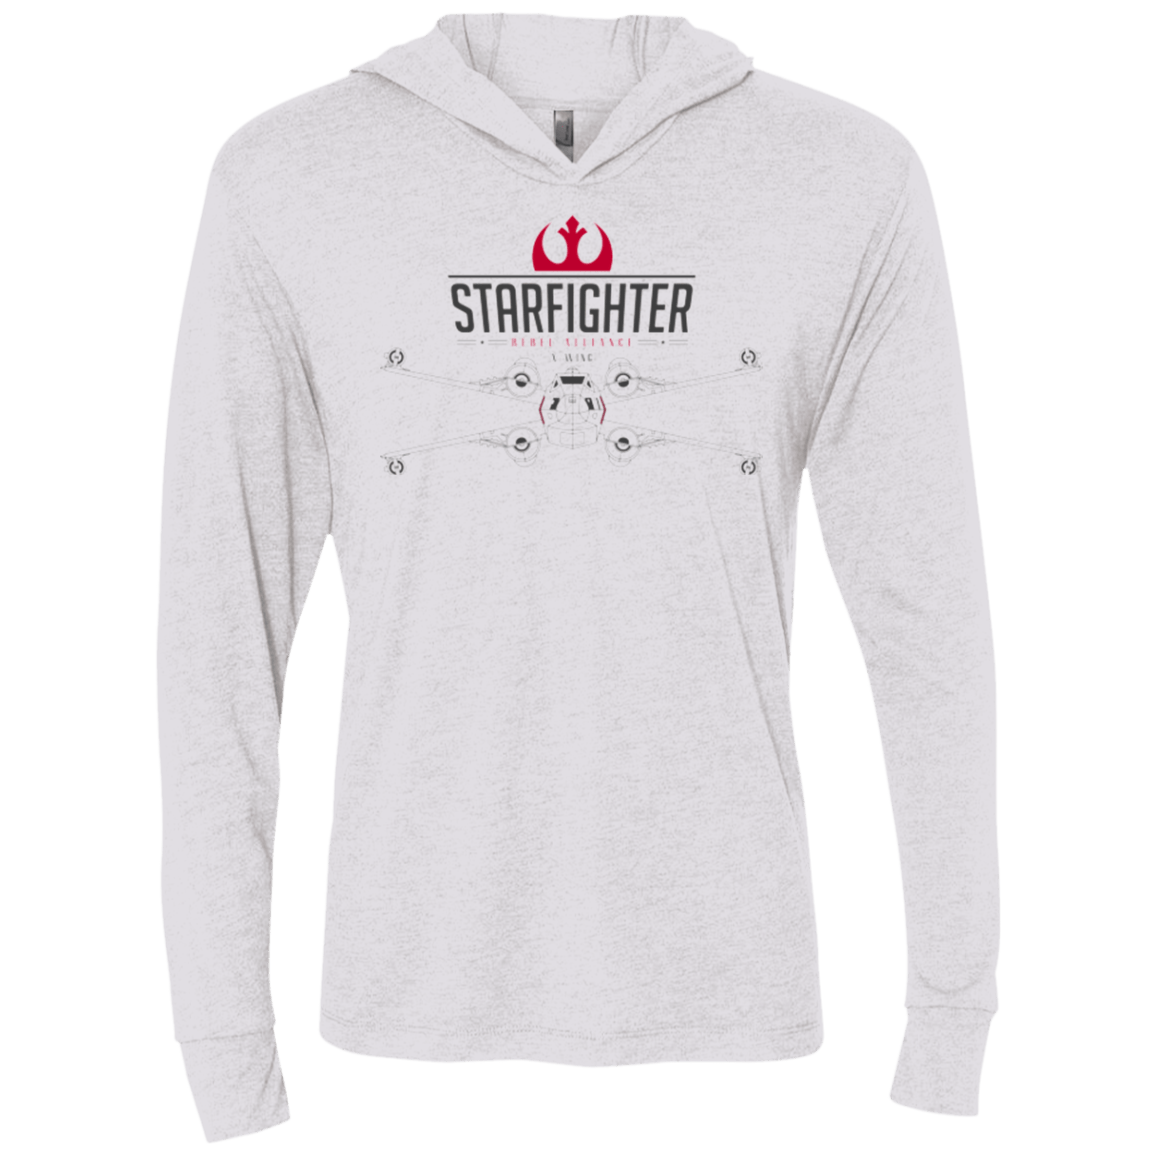 T-Shirts Heather White / X-Small X Wing Triblend Long Sleeve Hoodie Tee